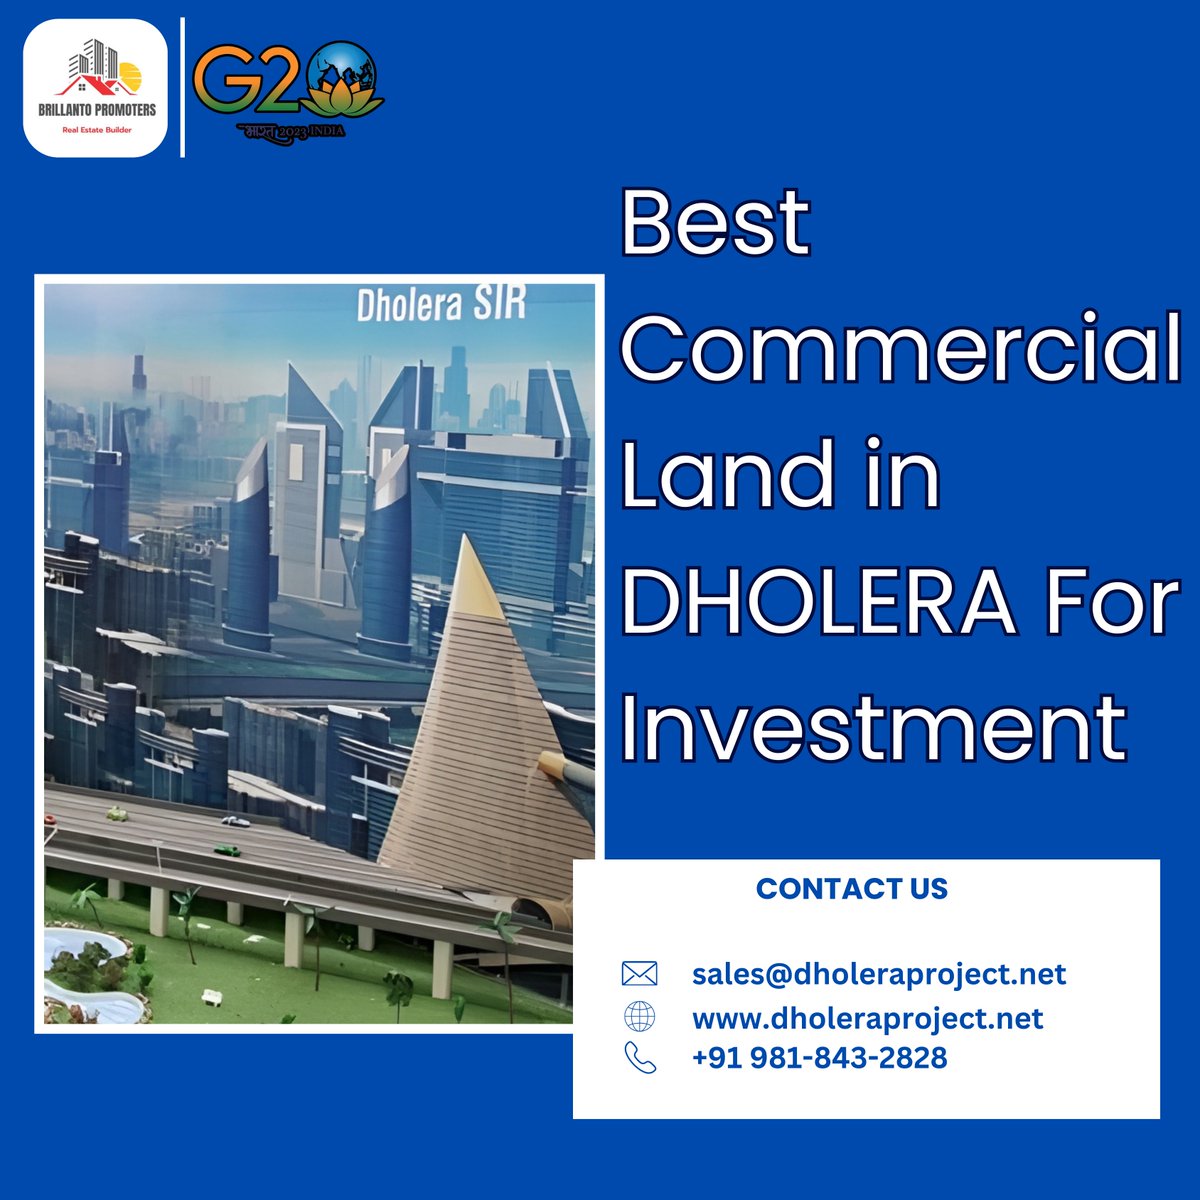 Sale of commercial land in the high access corridor zone of dholera smart city.
Invest in  #𝐃𝐡𝐨𝐥𝐞𝐫𝐚𝐒𝐦𝐚𝐫𝐭𝐂𝐢𝐭𝐲
Contact Now :  +91-9818432828
#growwithdholera #Dholeraproject #dholerasmartcity #dholerasir #dholeragroundreport #dholeraexpressway #DholeraInternational